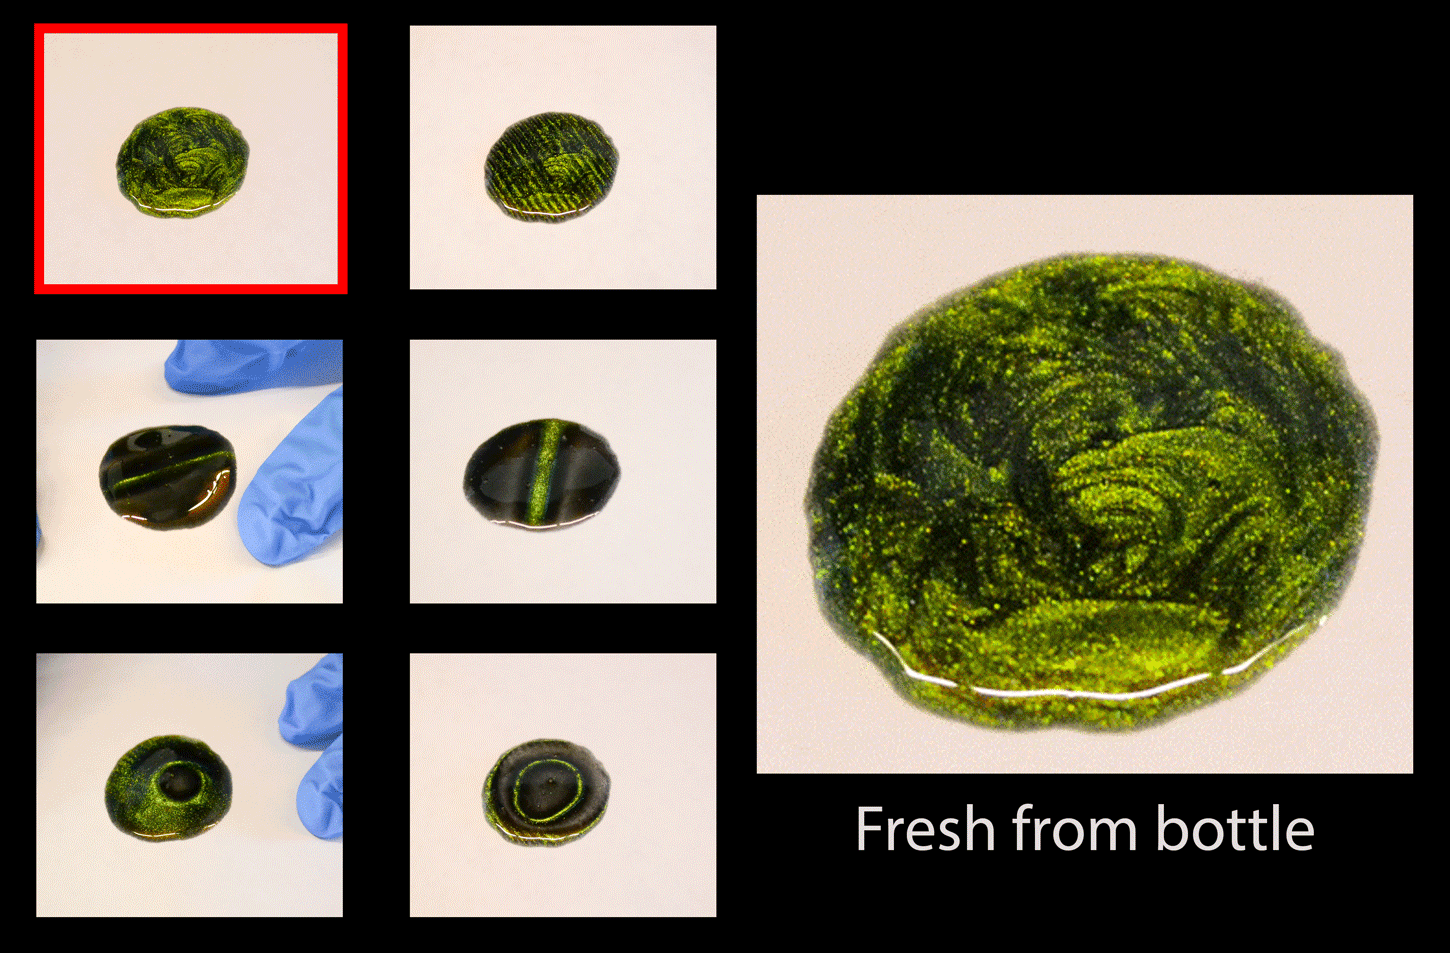 Fig. 3 (Click to enlarge). These images show the appearance of the nail polish (left to right) fresh out of the bottle, and with patterns made using a fridge magnet, a rectangular magnet, and a disc magnet, respectively.